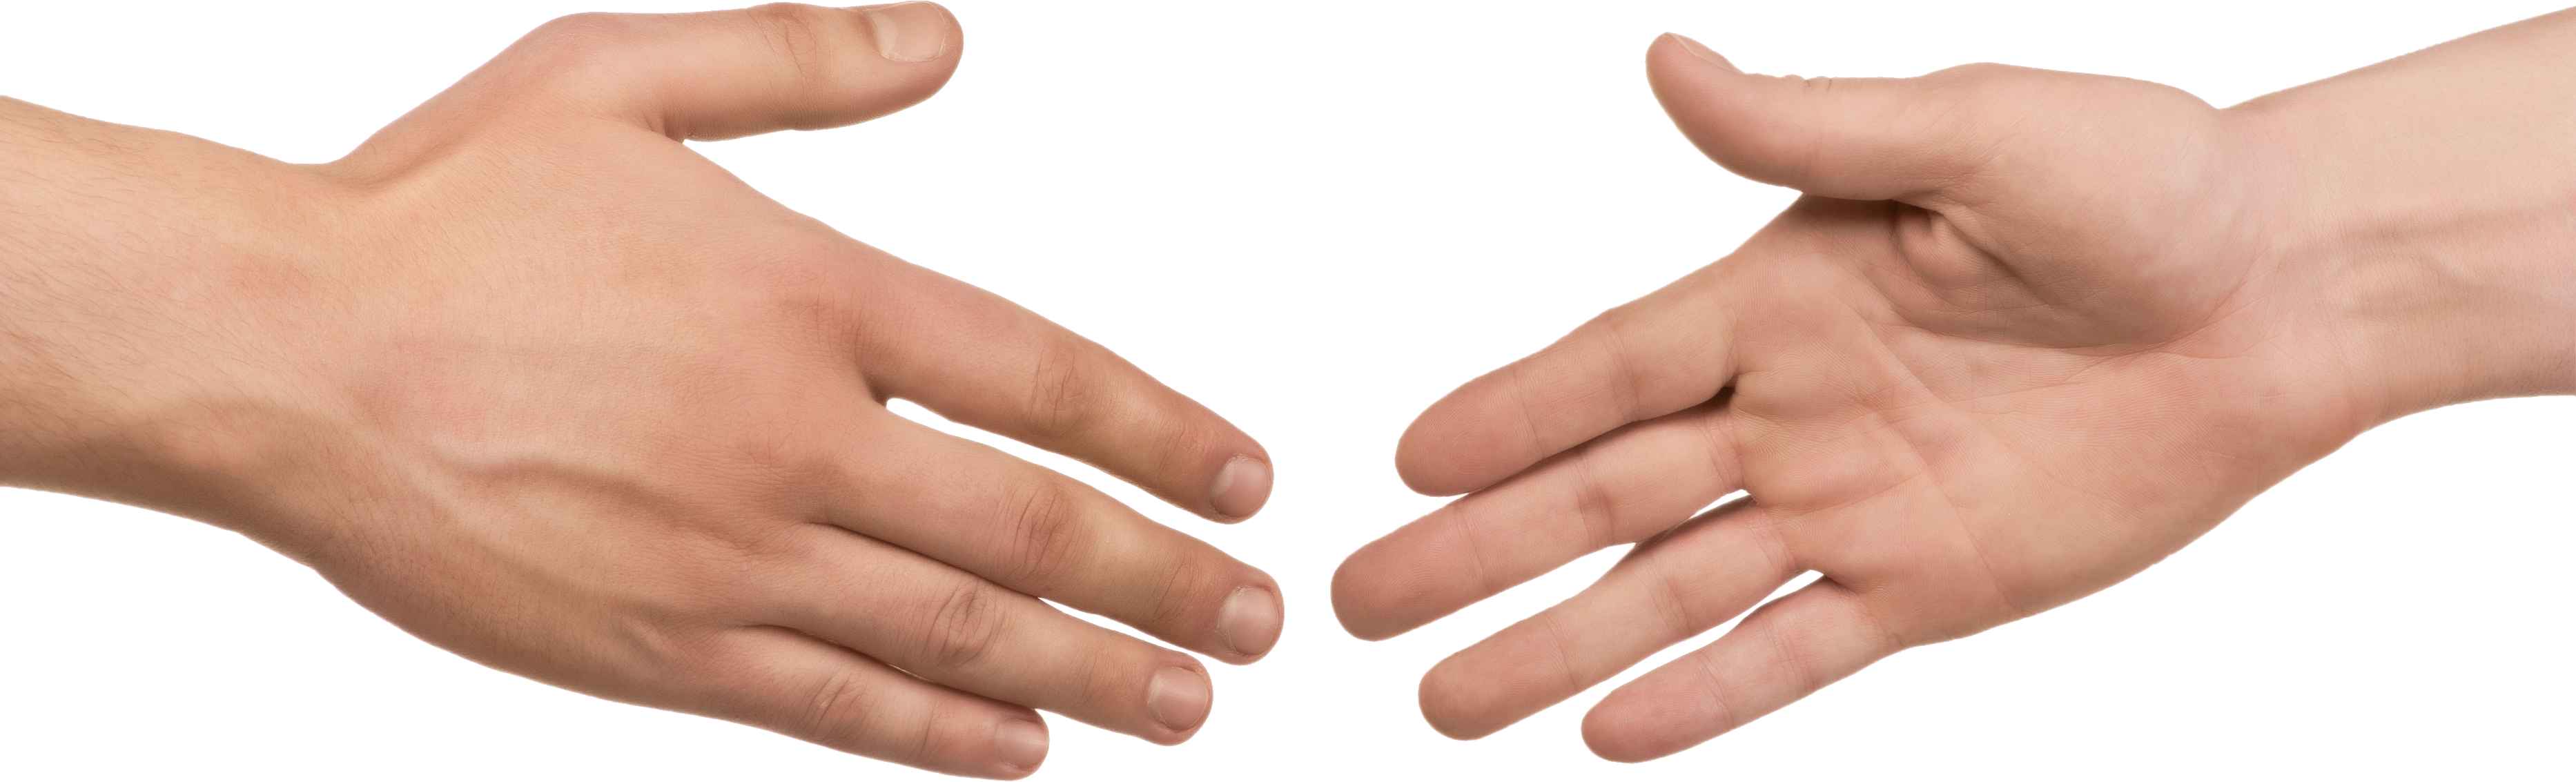 Png Two Hands - Handshake Png, Hands Image, Free Download, Transparent background PNG HD thumbnail